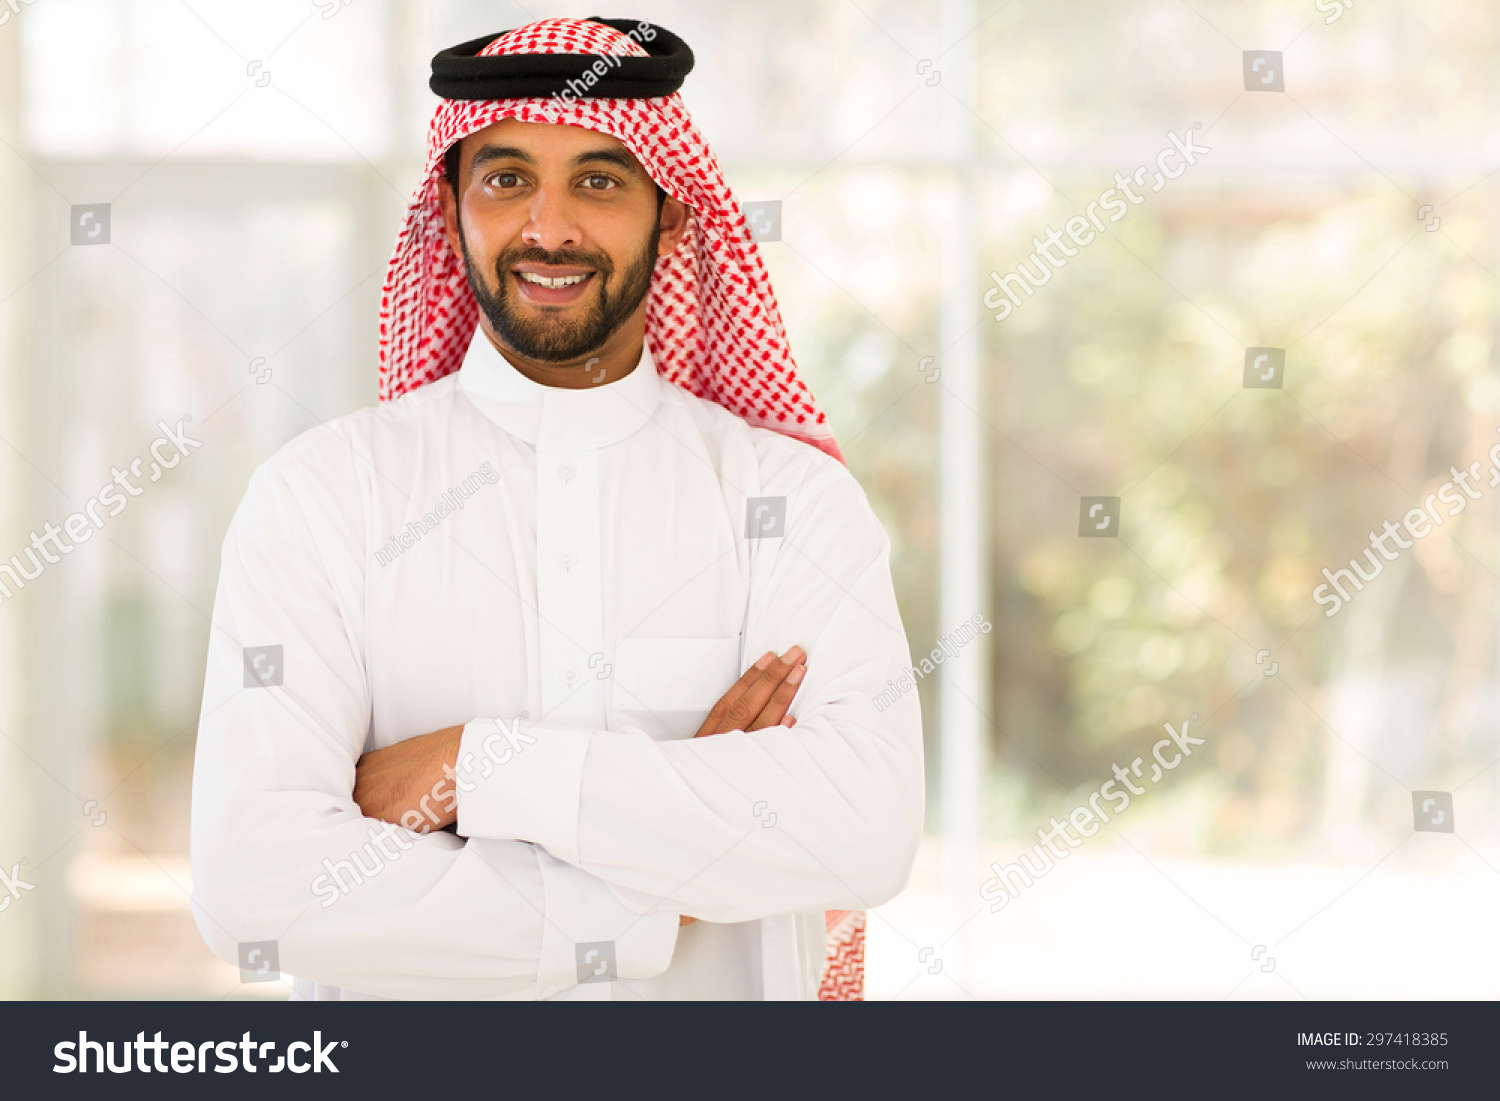 smiling arabian man with arms crossed #297418385